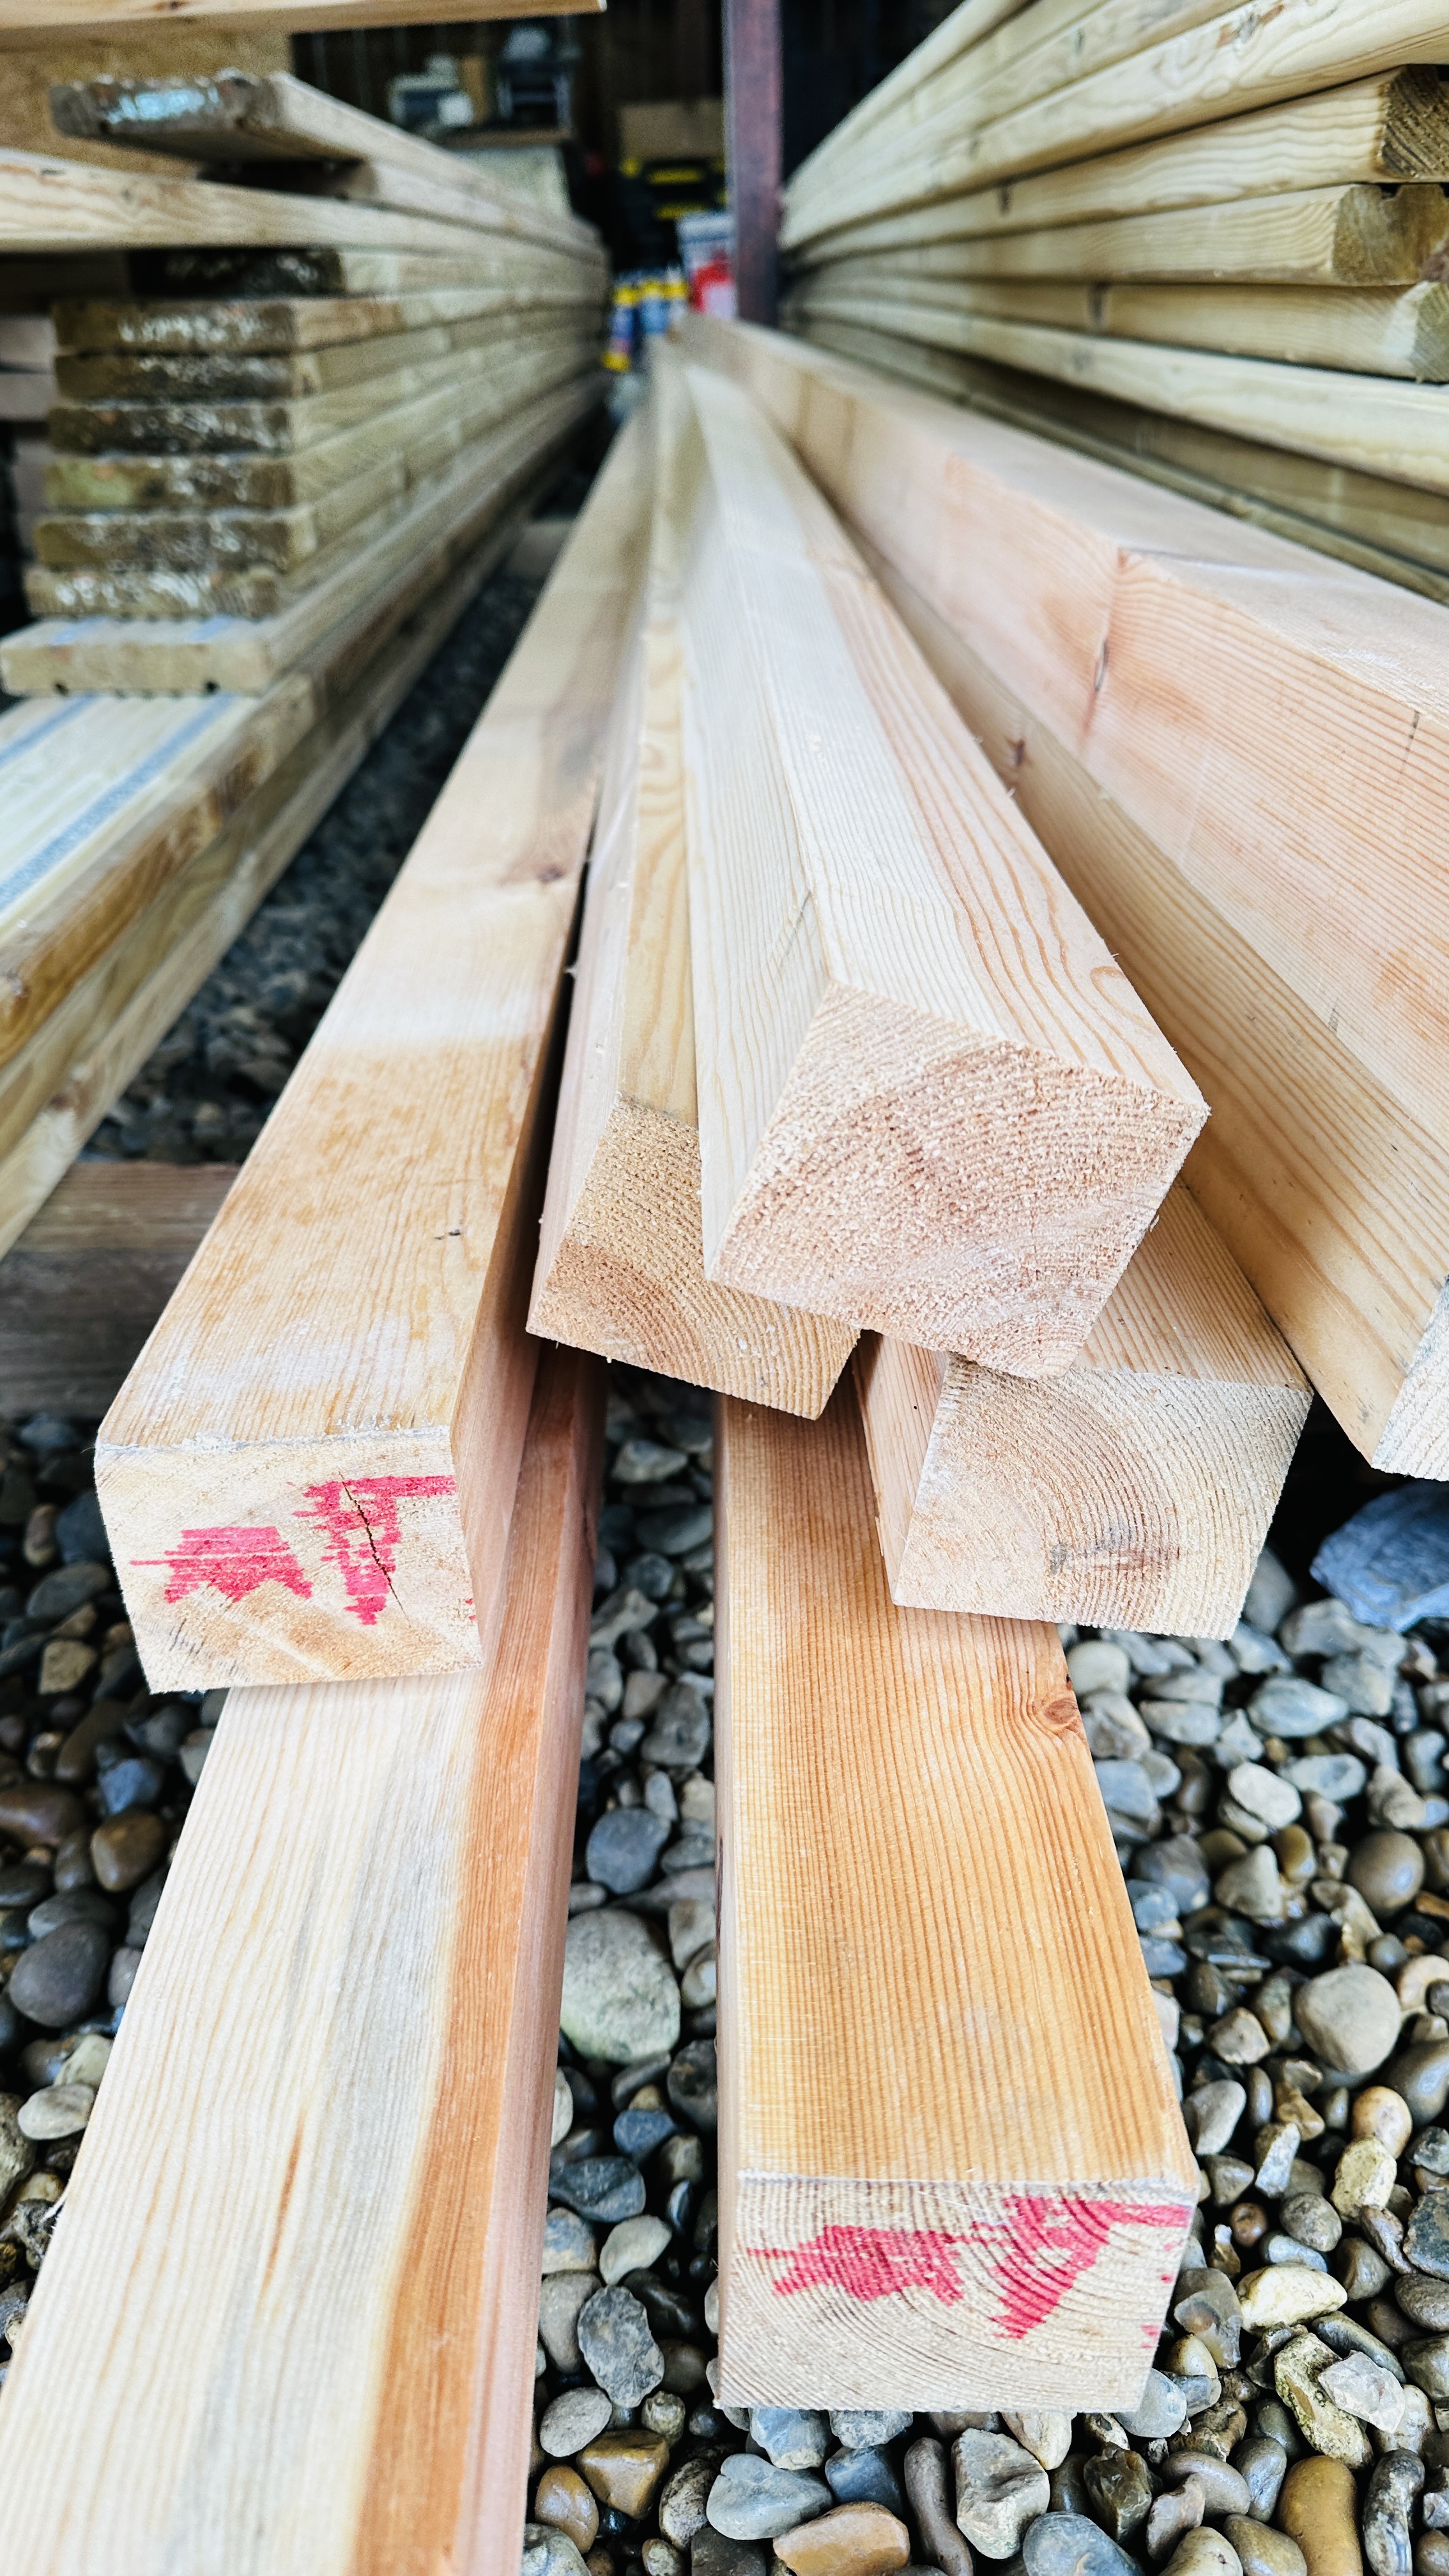 7 X 5 METRE LENGTHS OF 70MM X 60MM PLANED TIMBER. THIS LOT IS SUBJECT TO VAT ON HAMMER PRICE. - Image 2 of 4